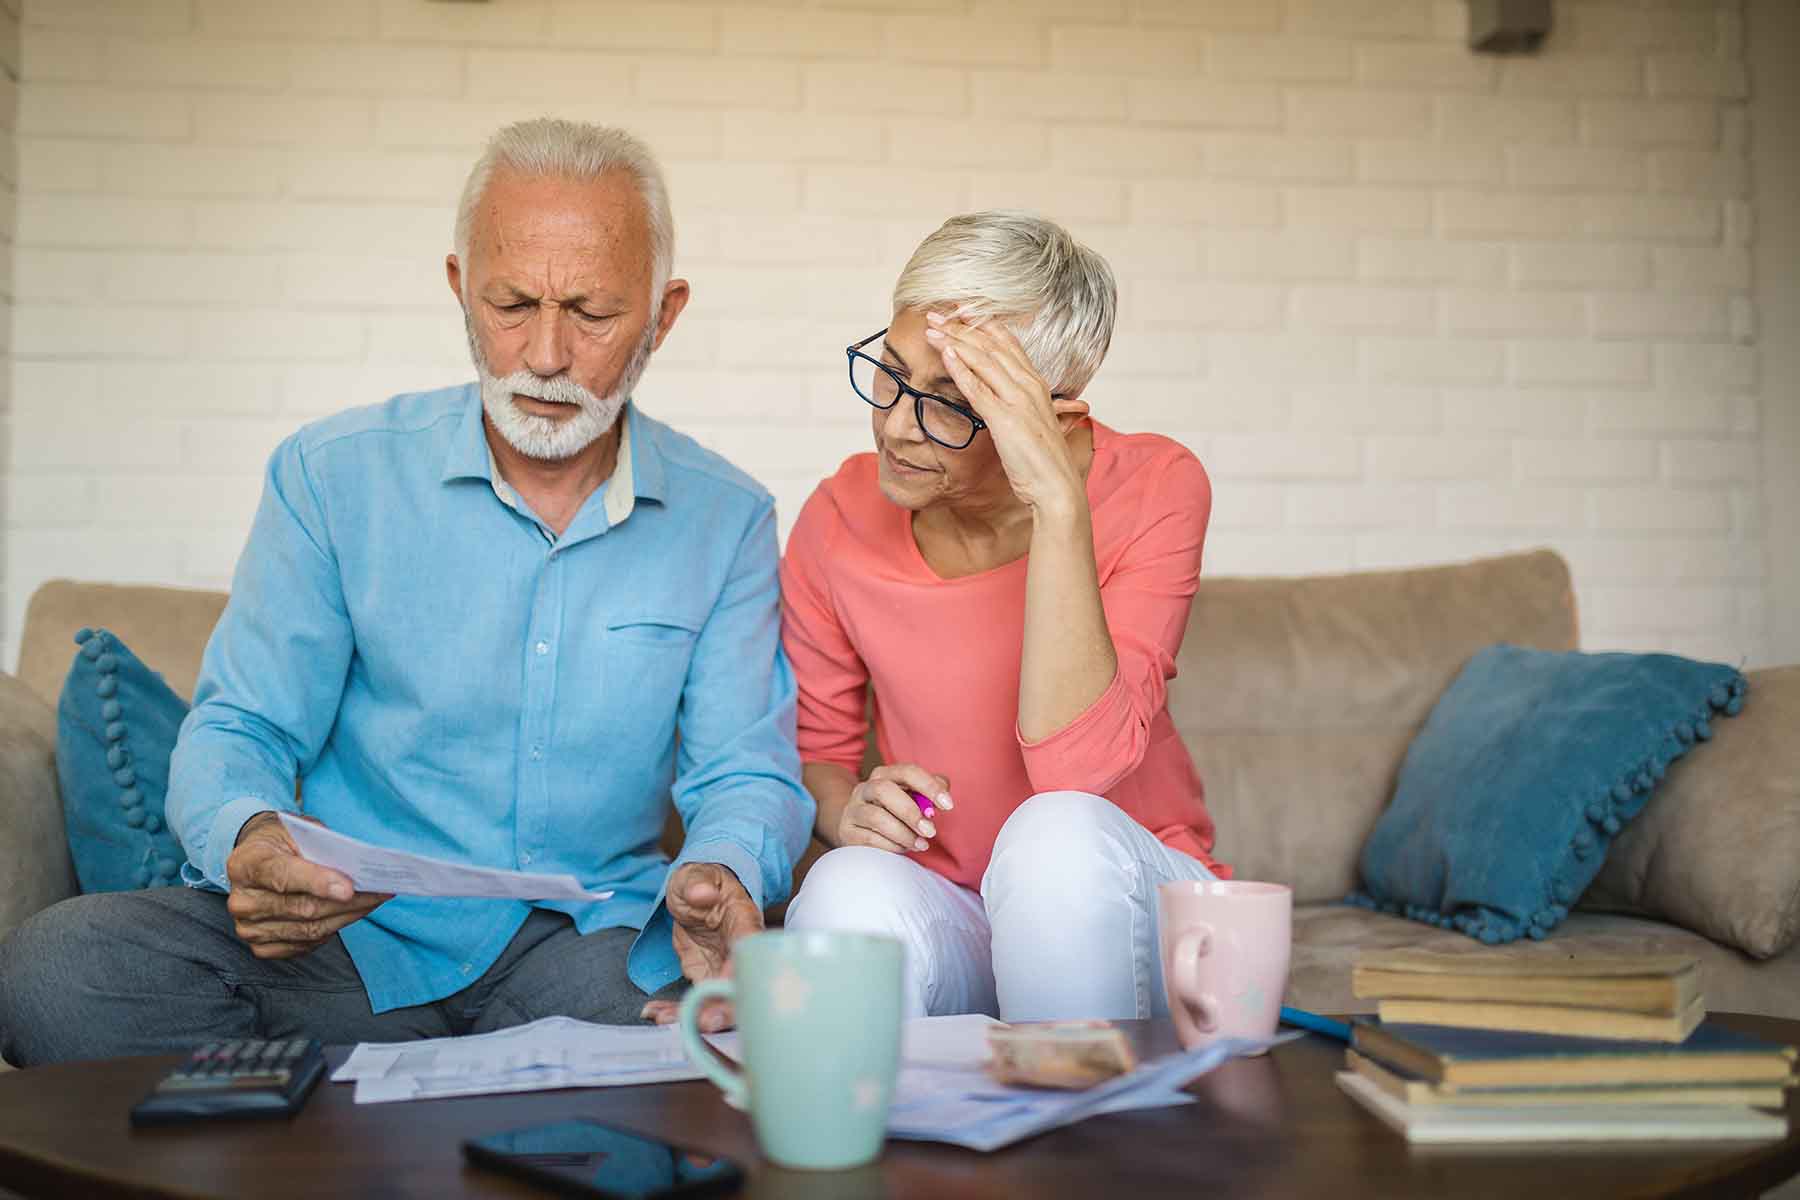 Senior couple sitting and solving a financial issue together